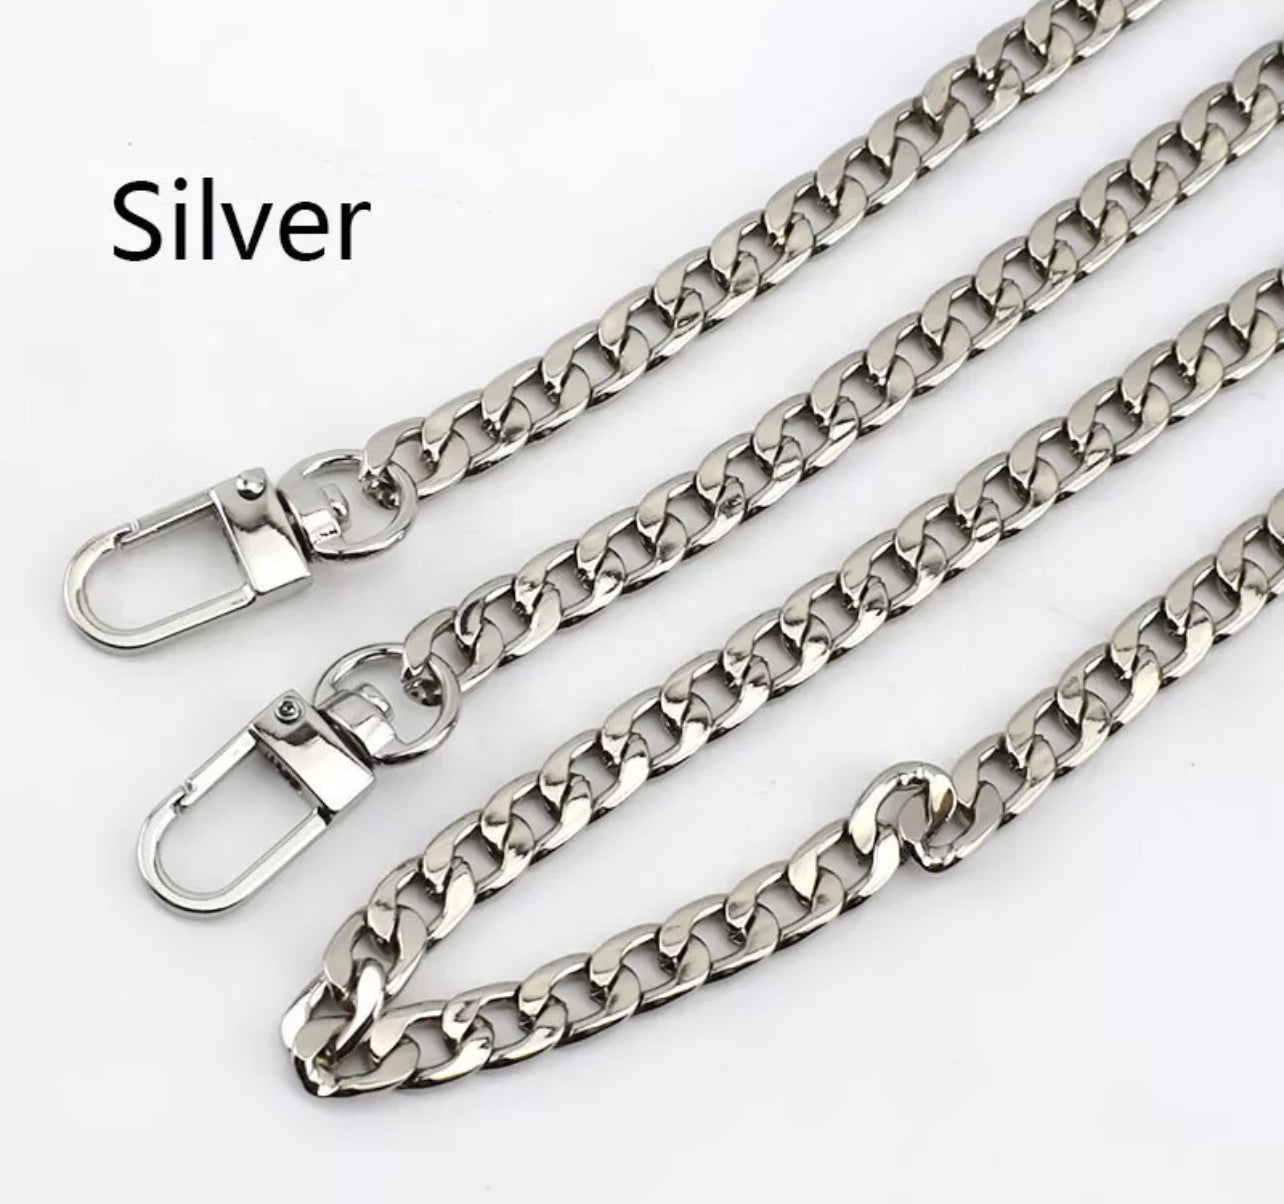 New Metal Purse Chain Straps Short 23.75 and Long 47 - Various Lengths 23.5” Silver Chain Strap Length Short